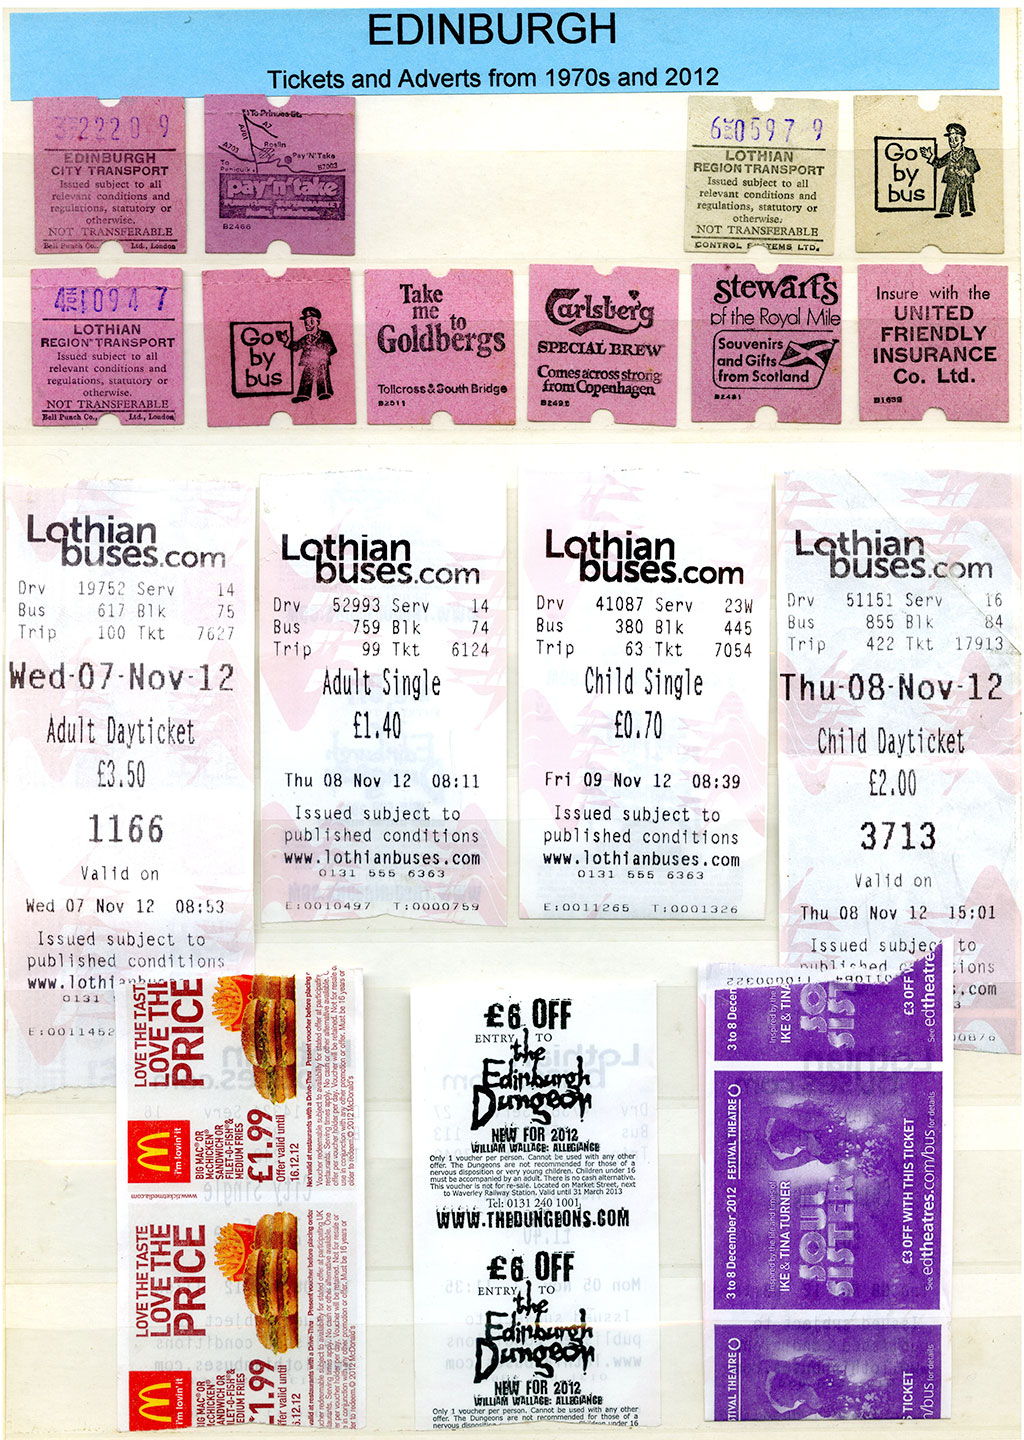 A Selection of Edinburgh Bus Tickets with adverts on the backs of some of these tickets  -  1970s to 2012